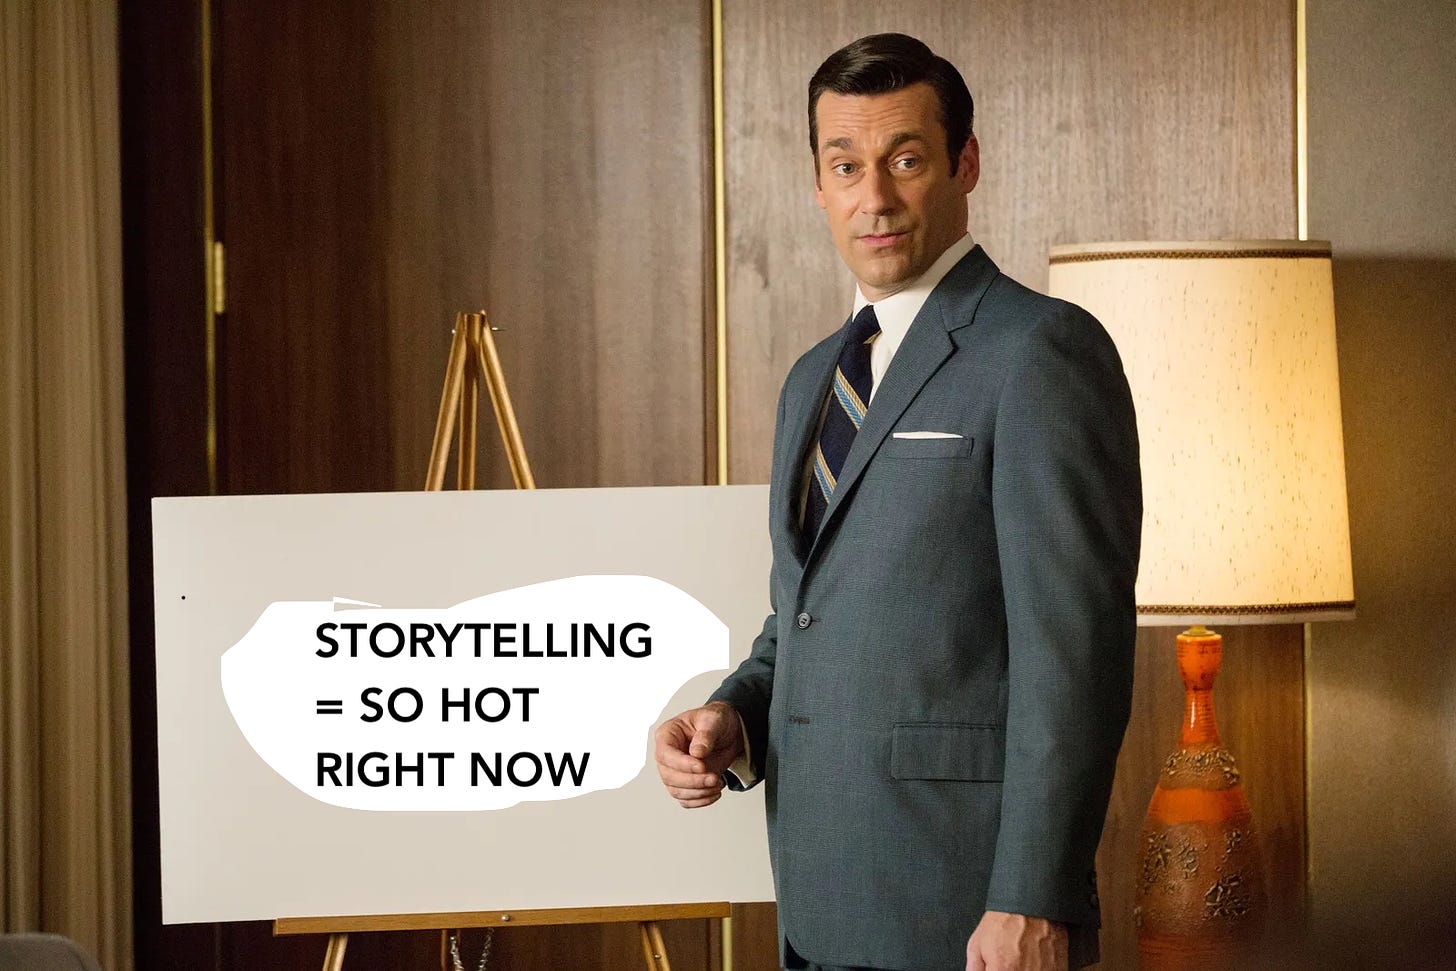 A 1960's ad executive named Don Draper, in a gray suit, looks a little confused in a wood paneled room. He's standing in front of an easel. I've edited the easel to say: "Storytelling = So Hot Right Now."